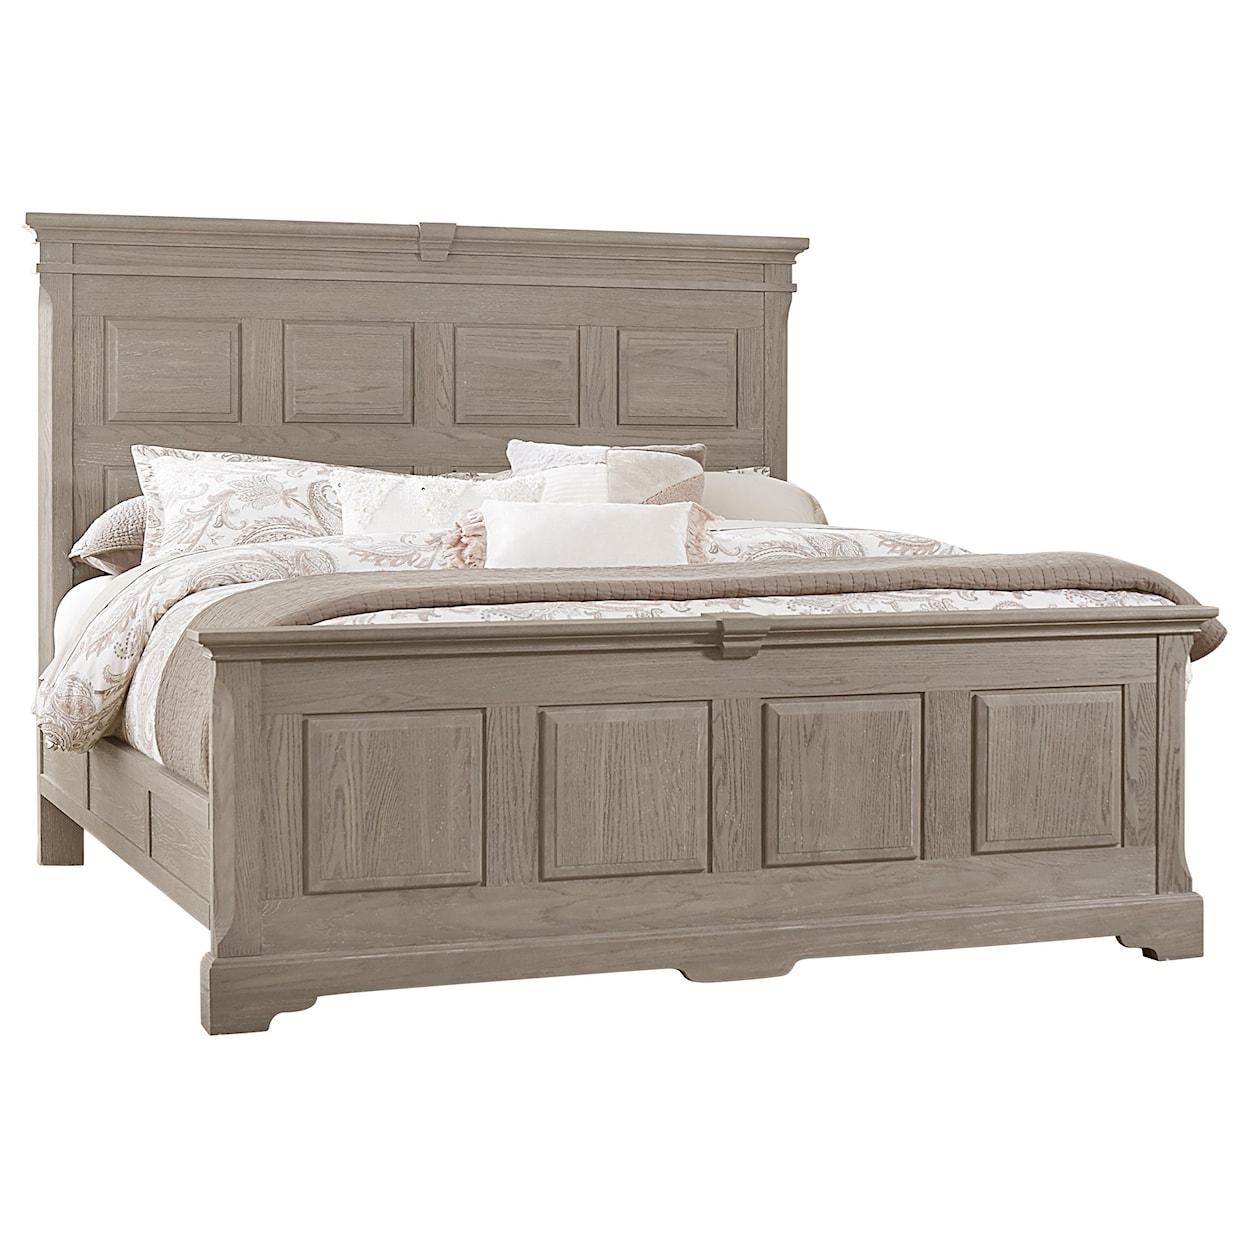 Virginia House Heritage King Mansion Bed with Decorative Side Rails